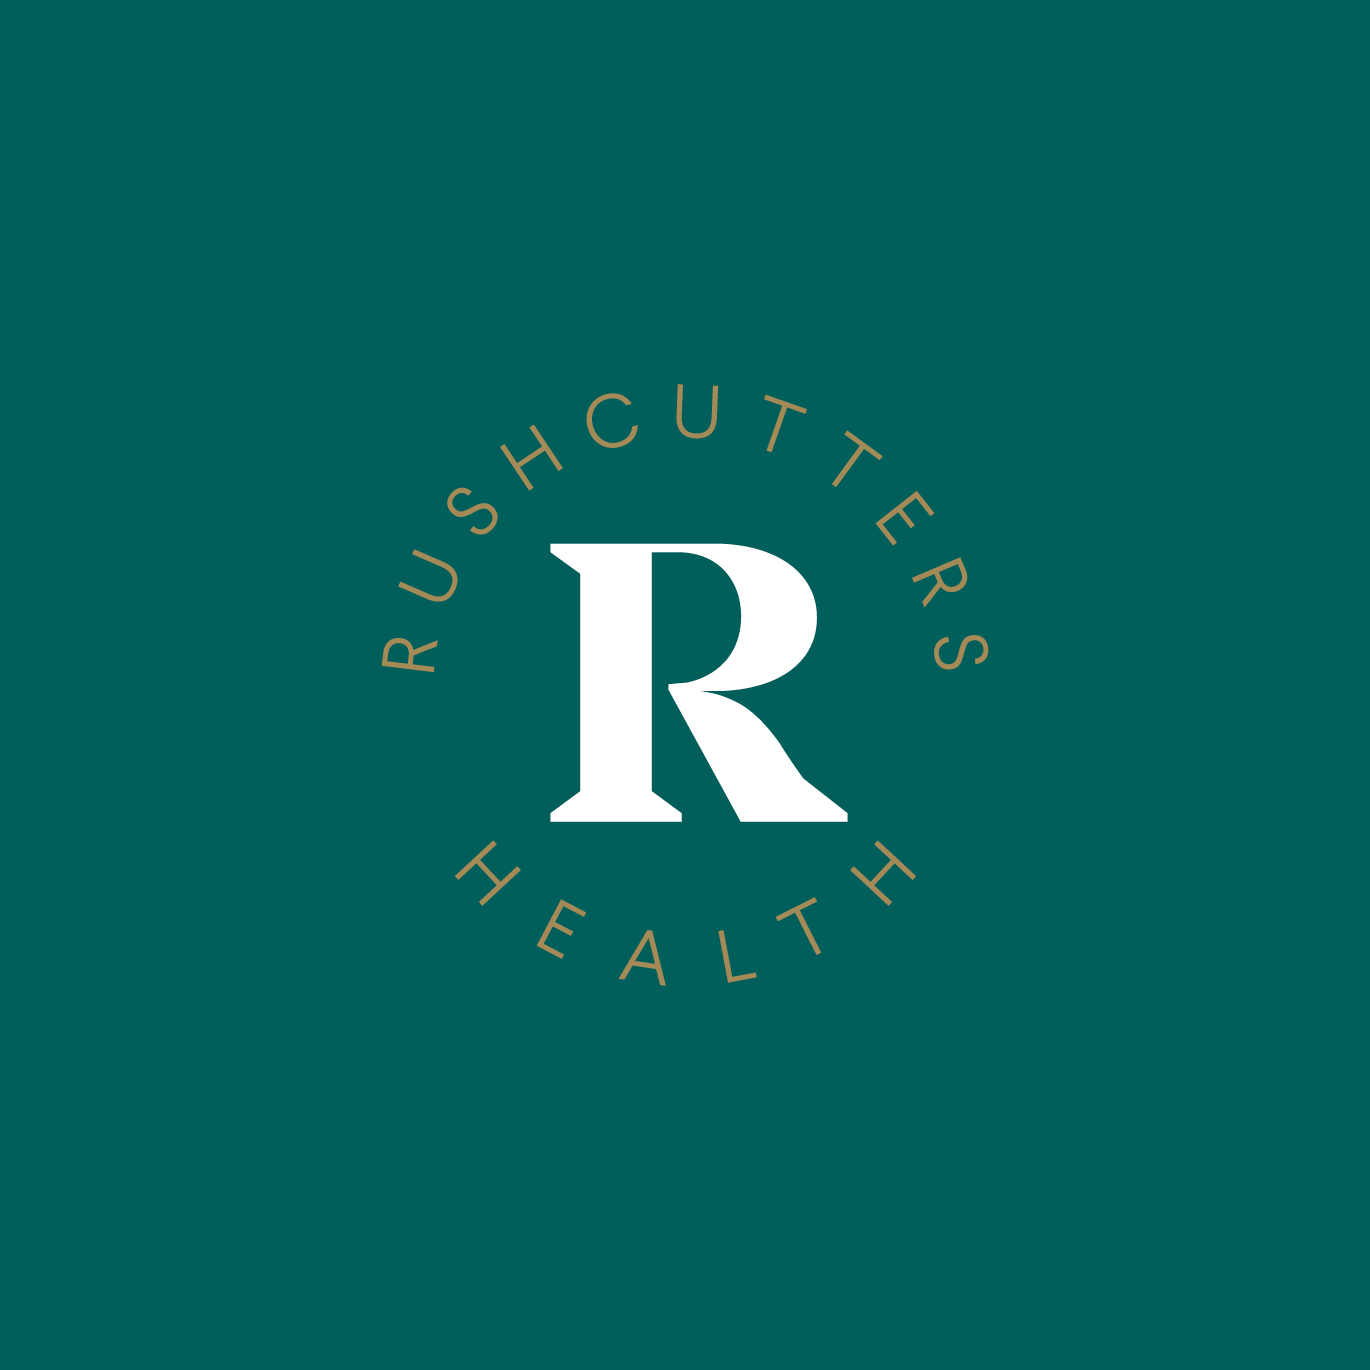 Rushcutters Health logo by Squeeze Creative